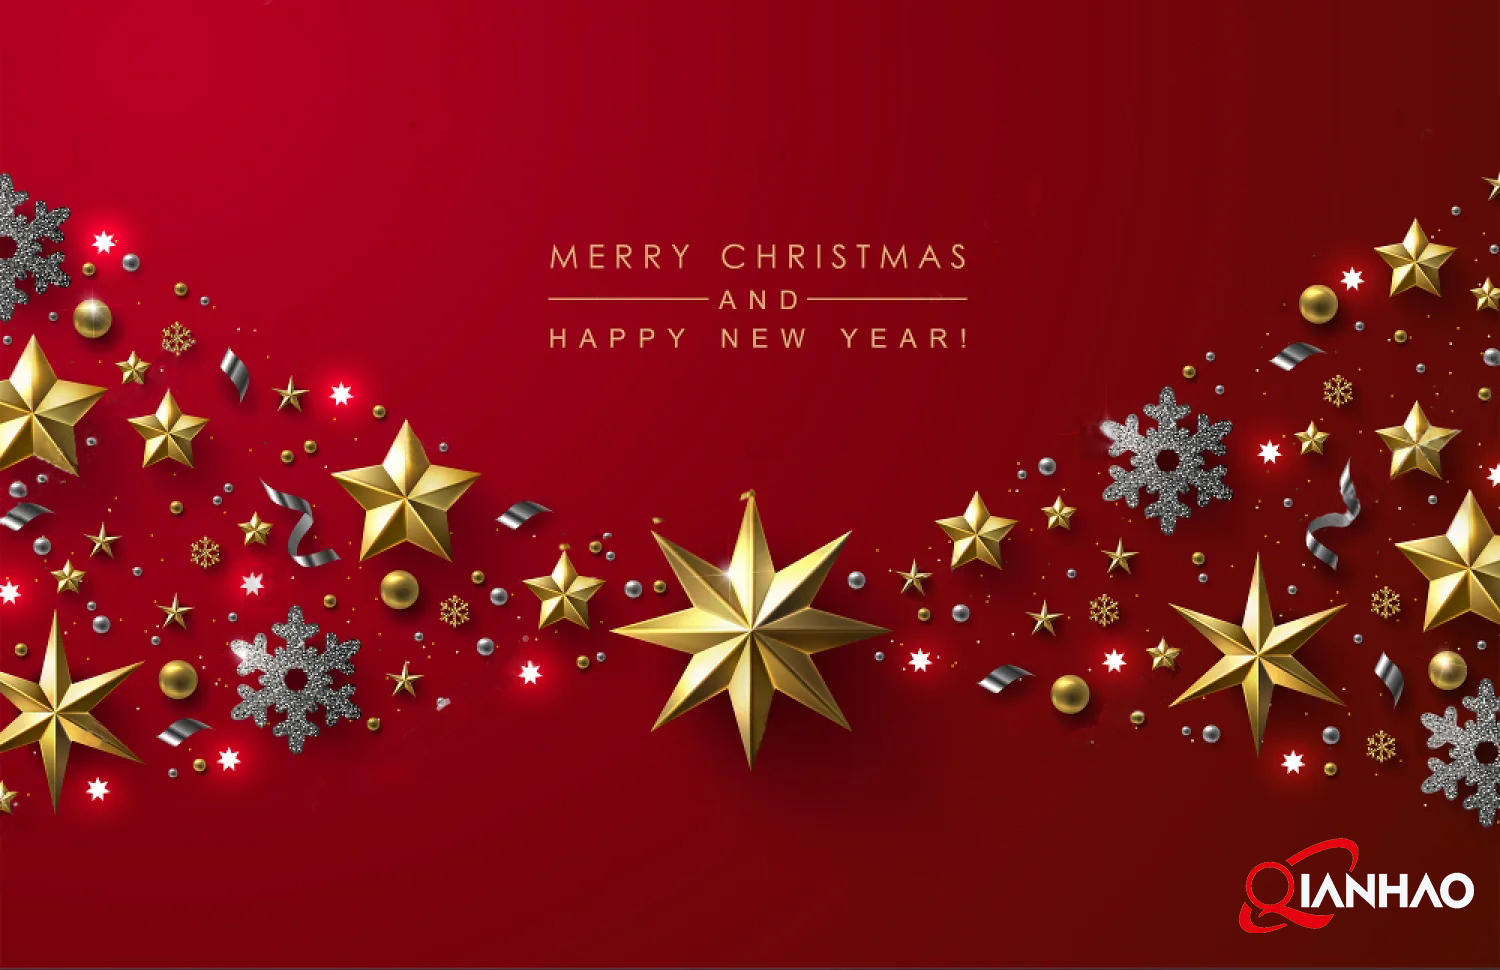 Merry Christmas from Qianhao Group(图1)